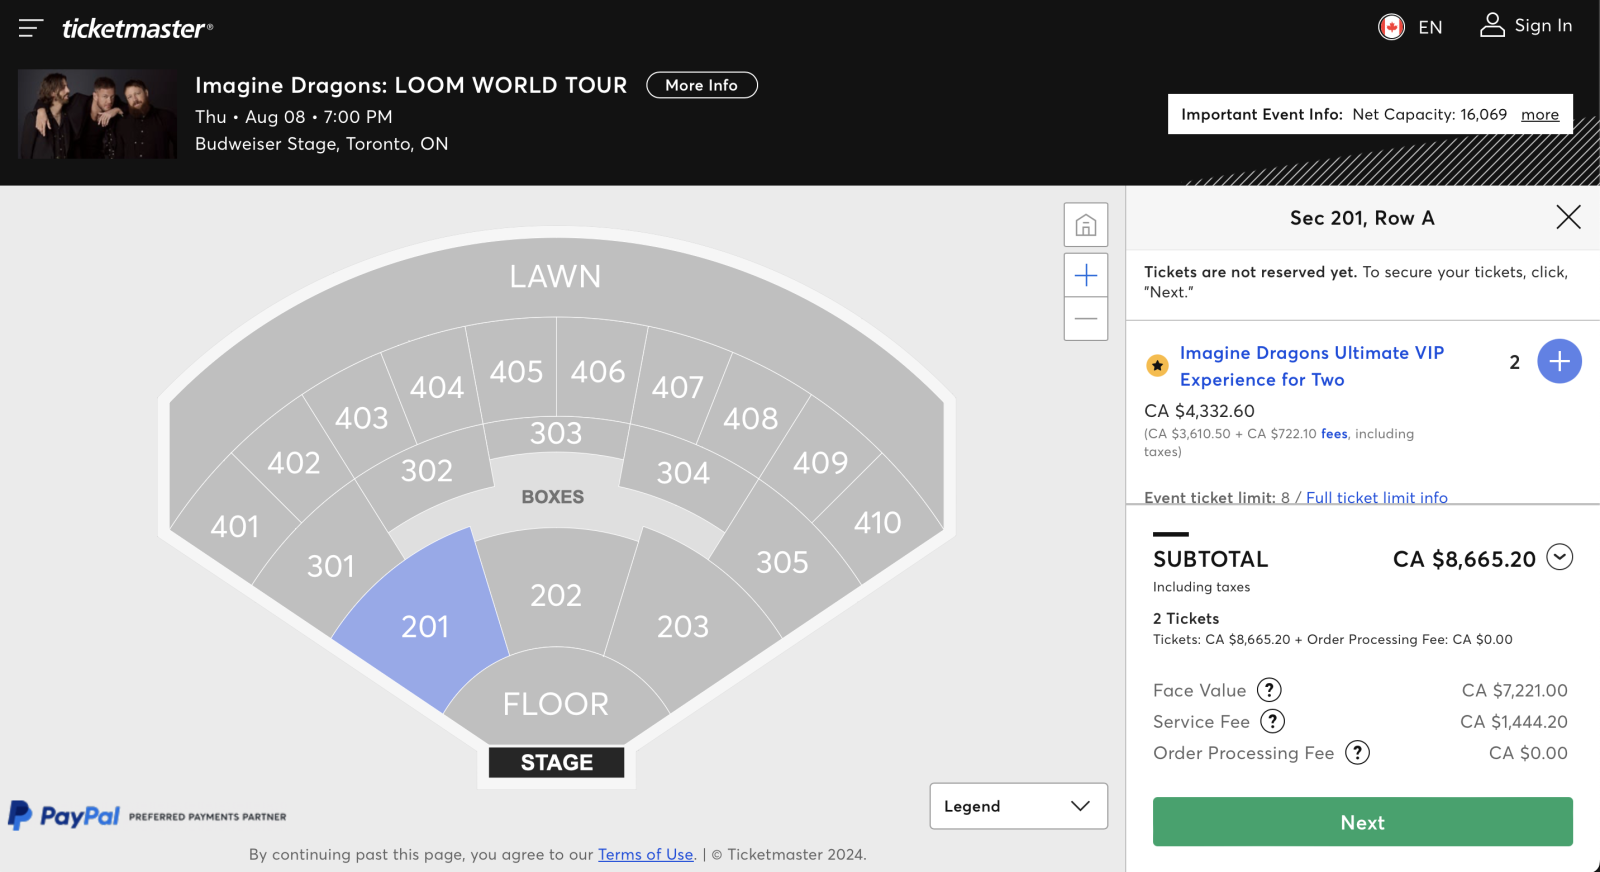 Imagine Dragons Ultimate VIP Experience Price cost